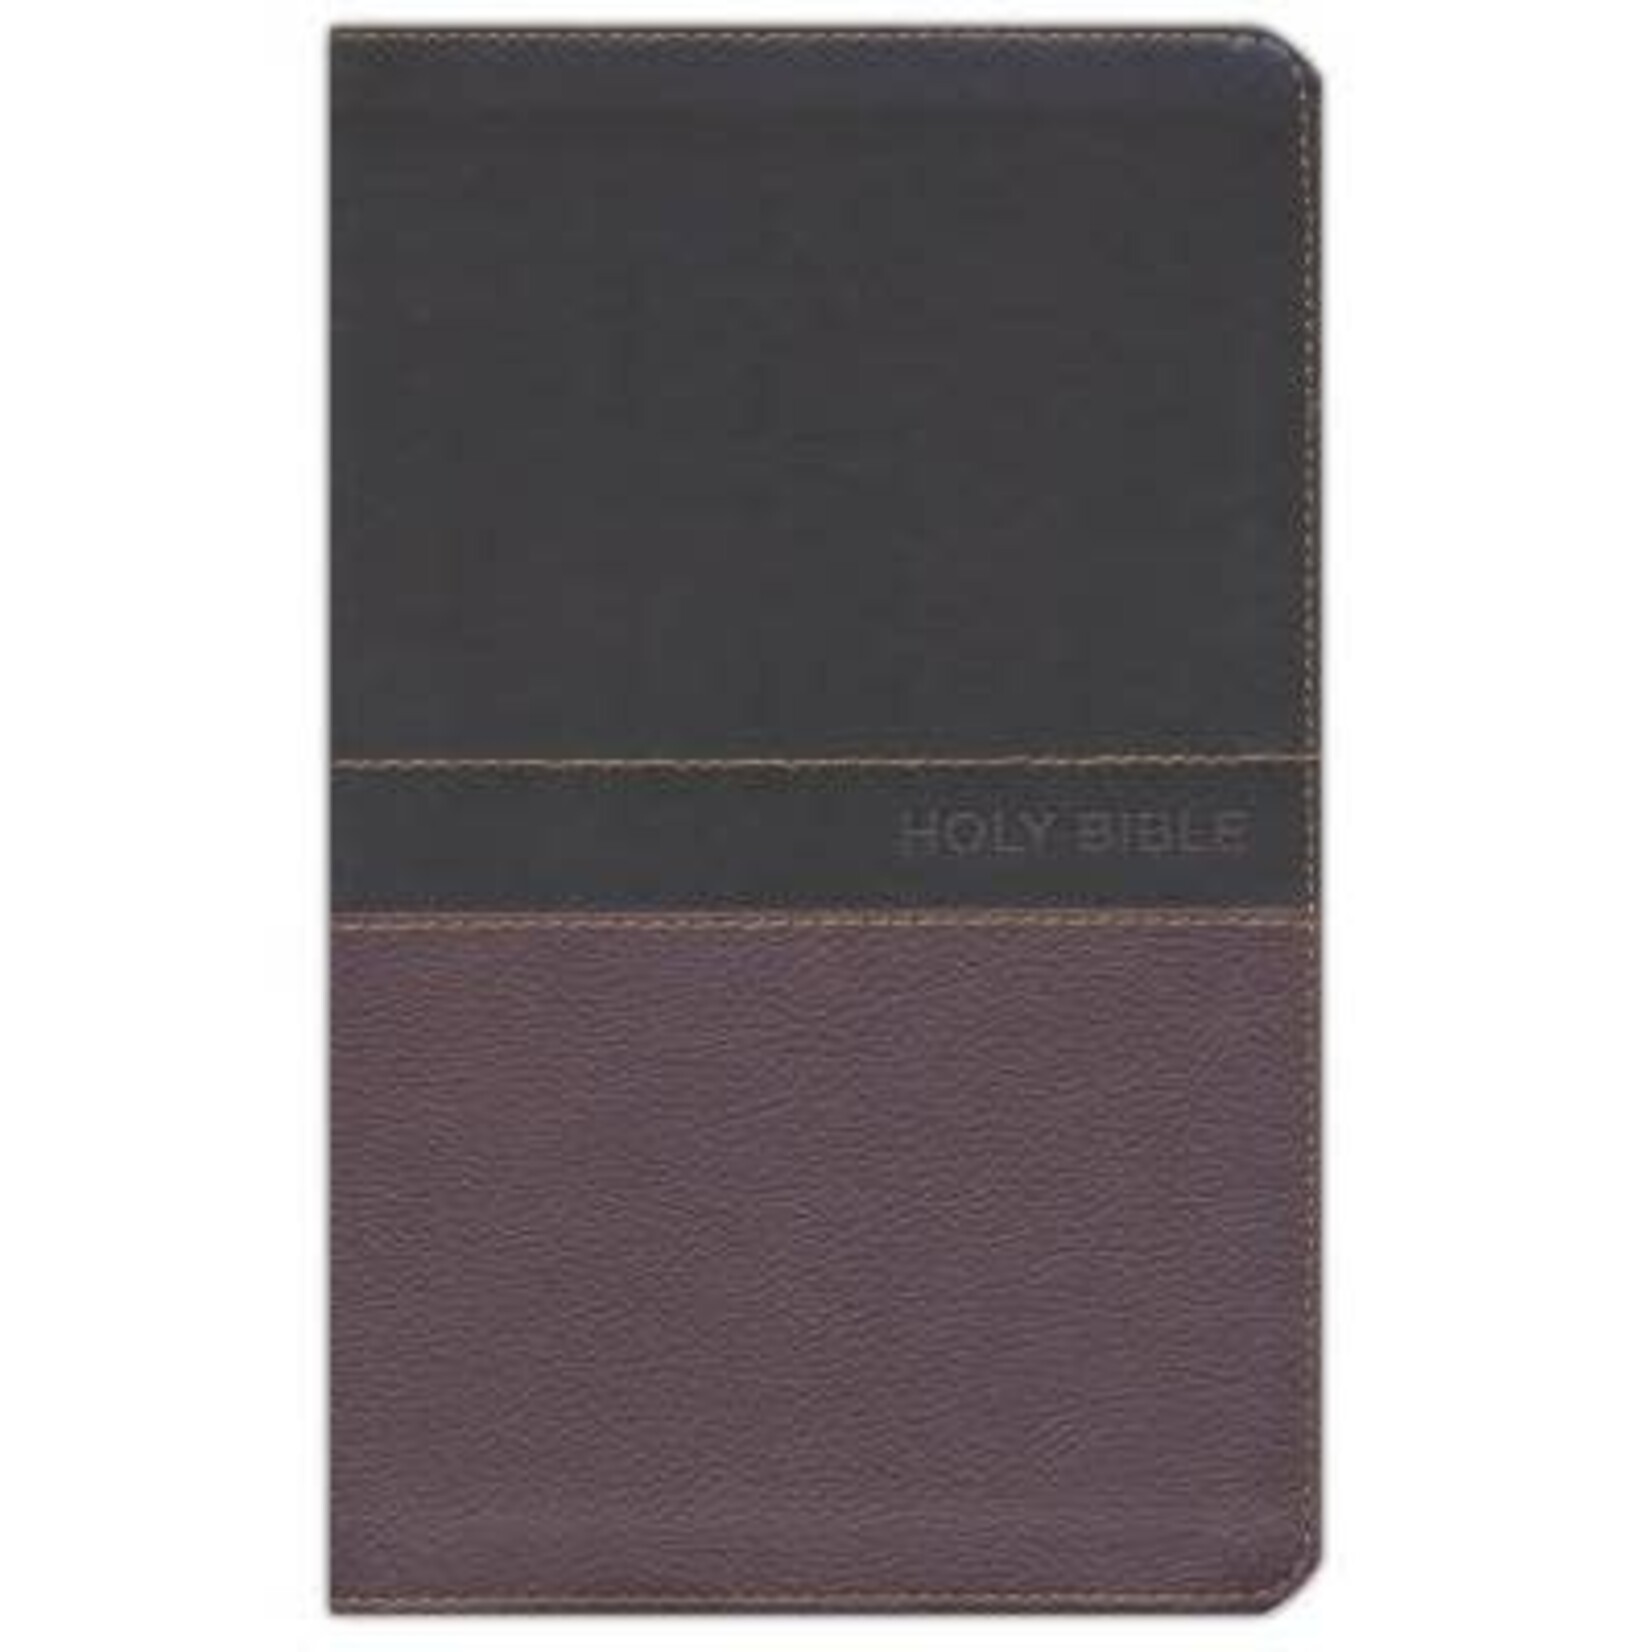 Holy Bible (NKJV) New King James Version Deluxe Gift Bible - Toffee